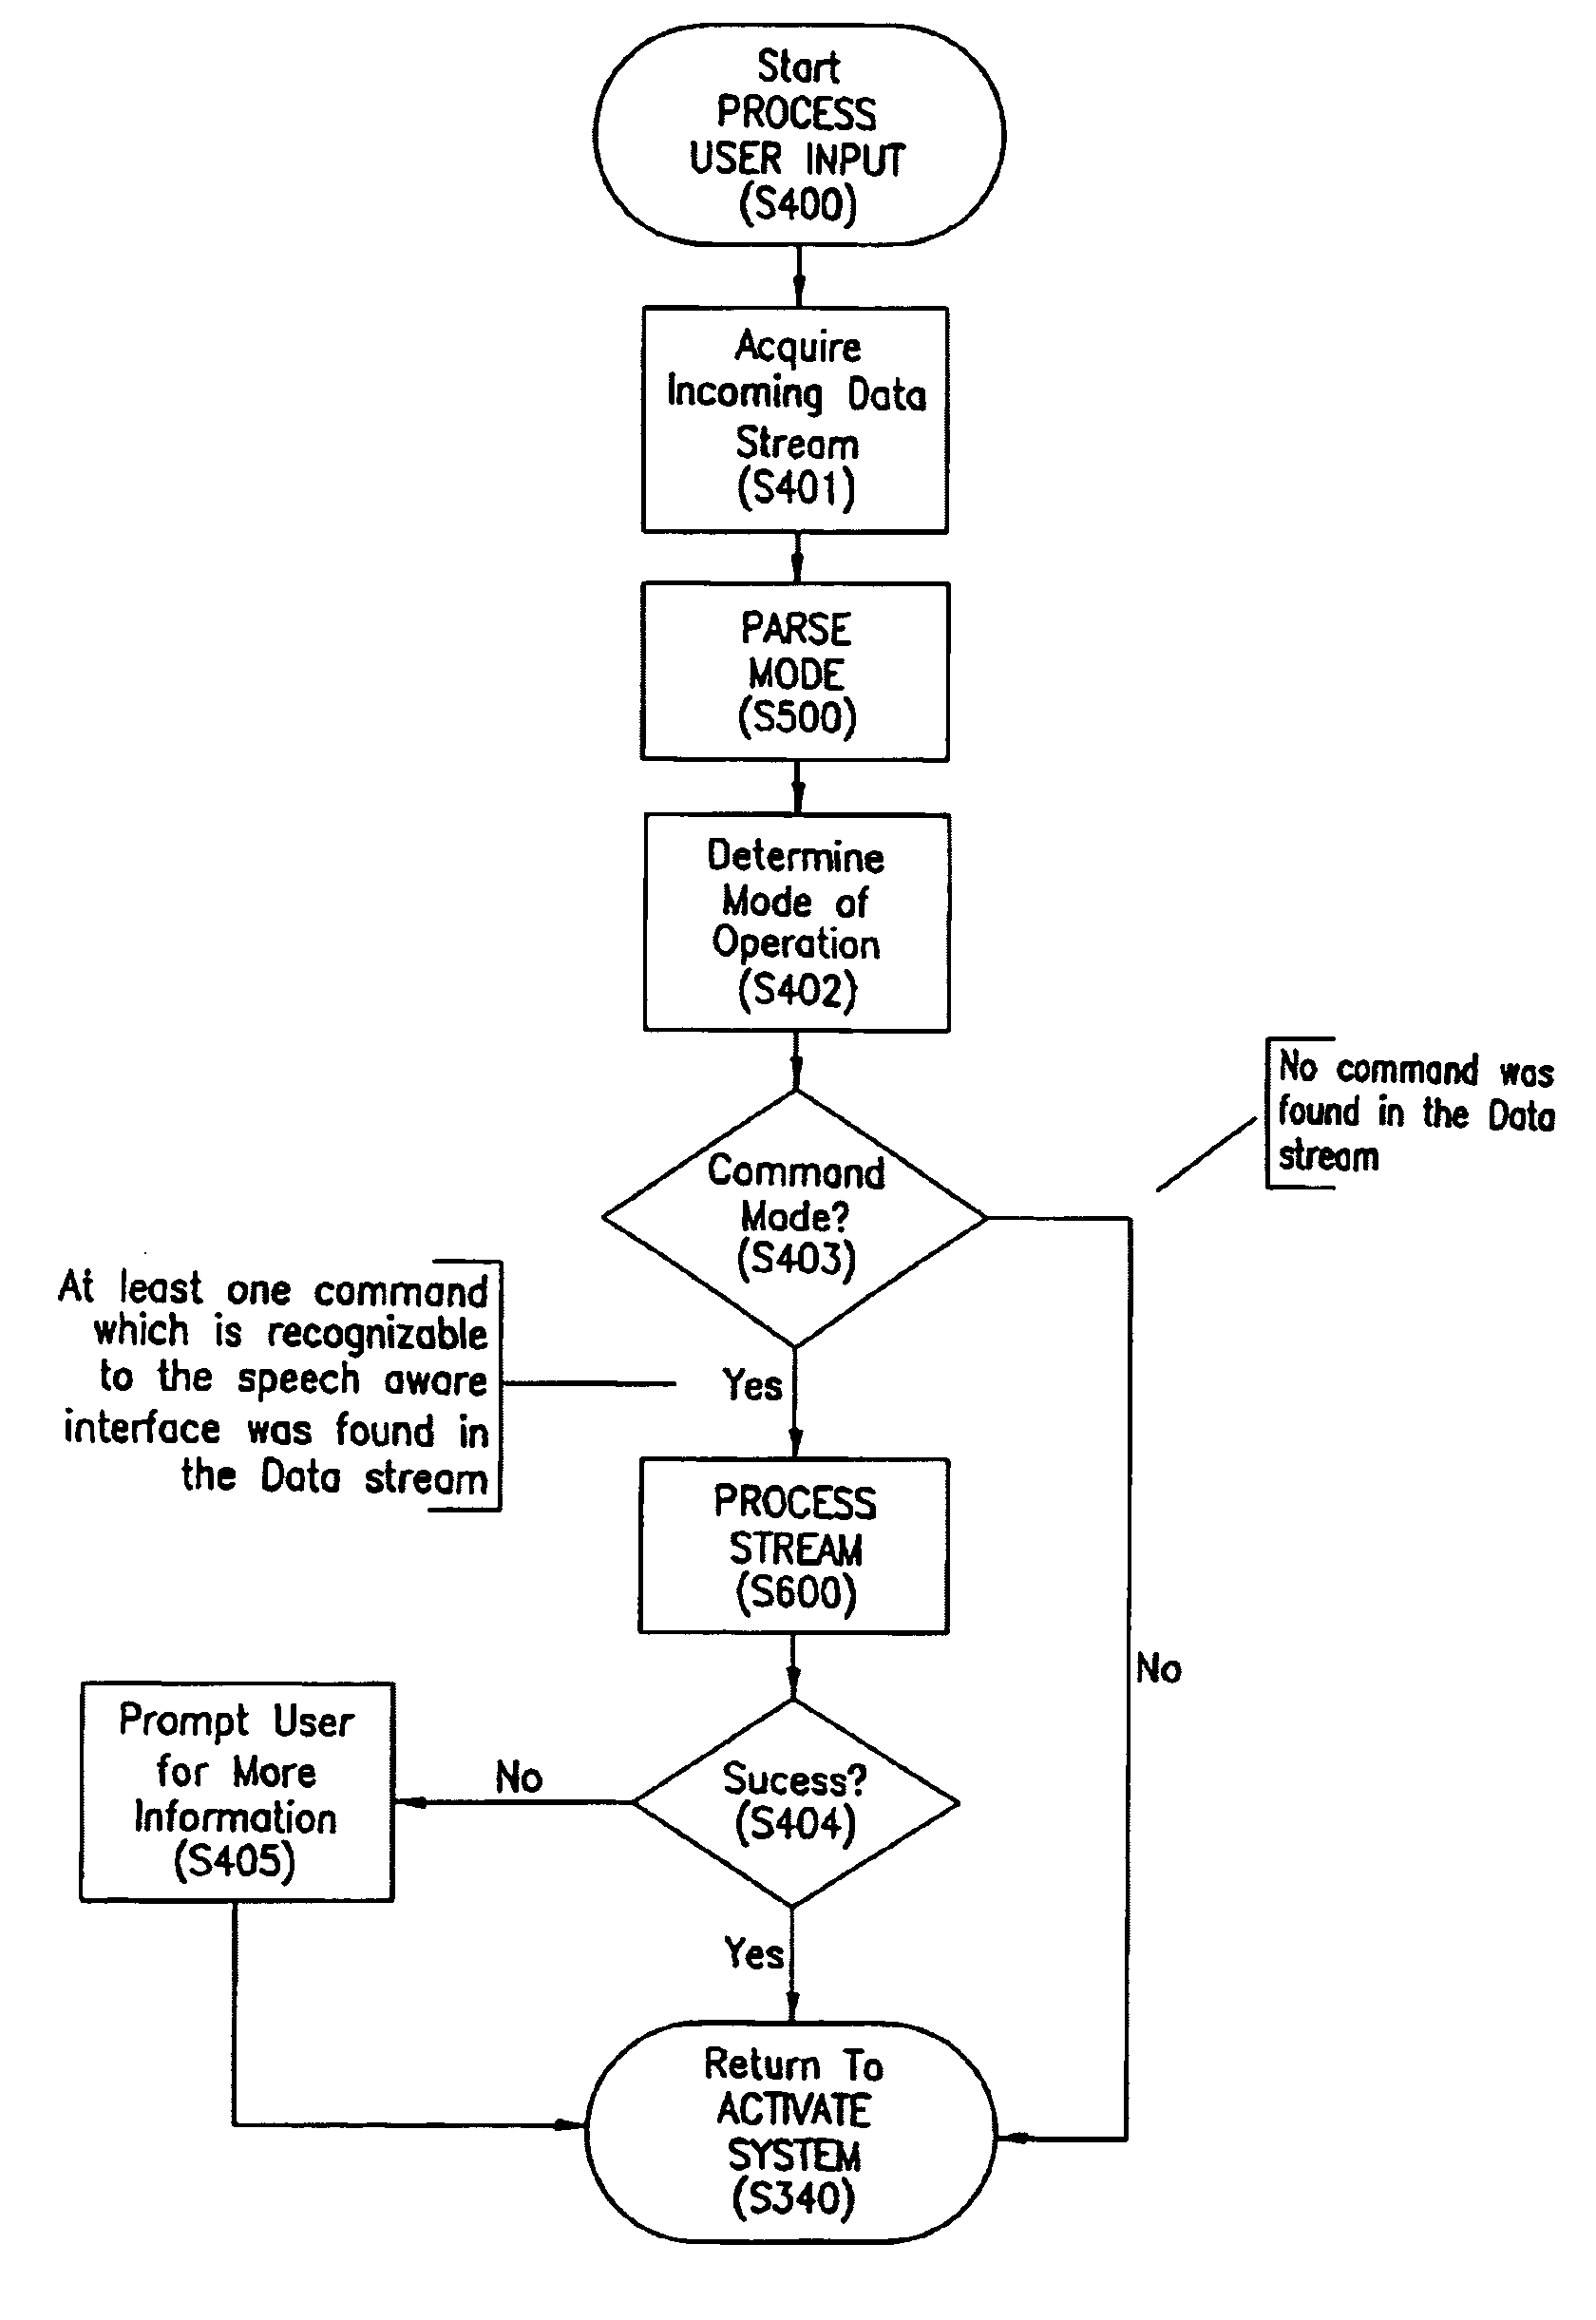 Method for integrating processes with a multi-faceted human centered interface